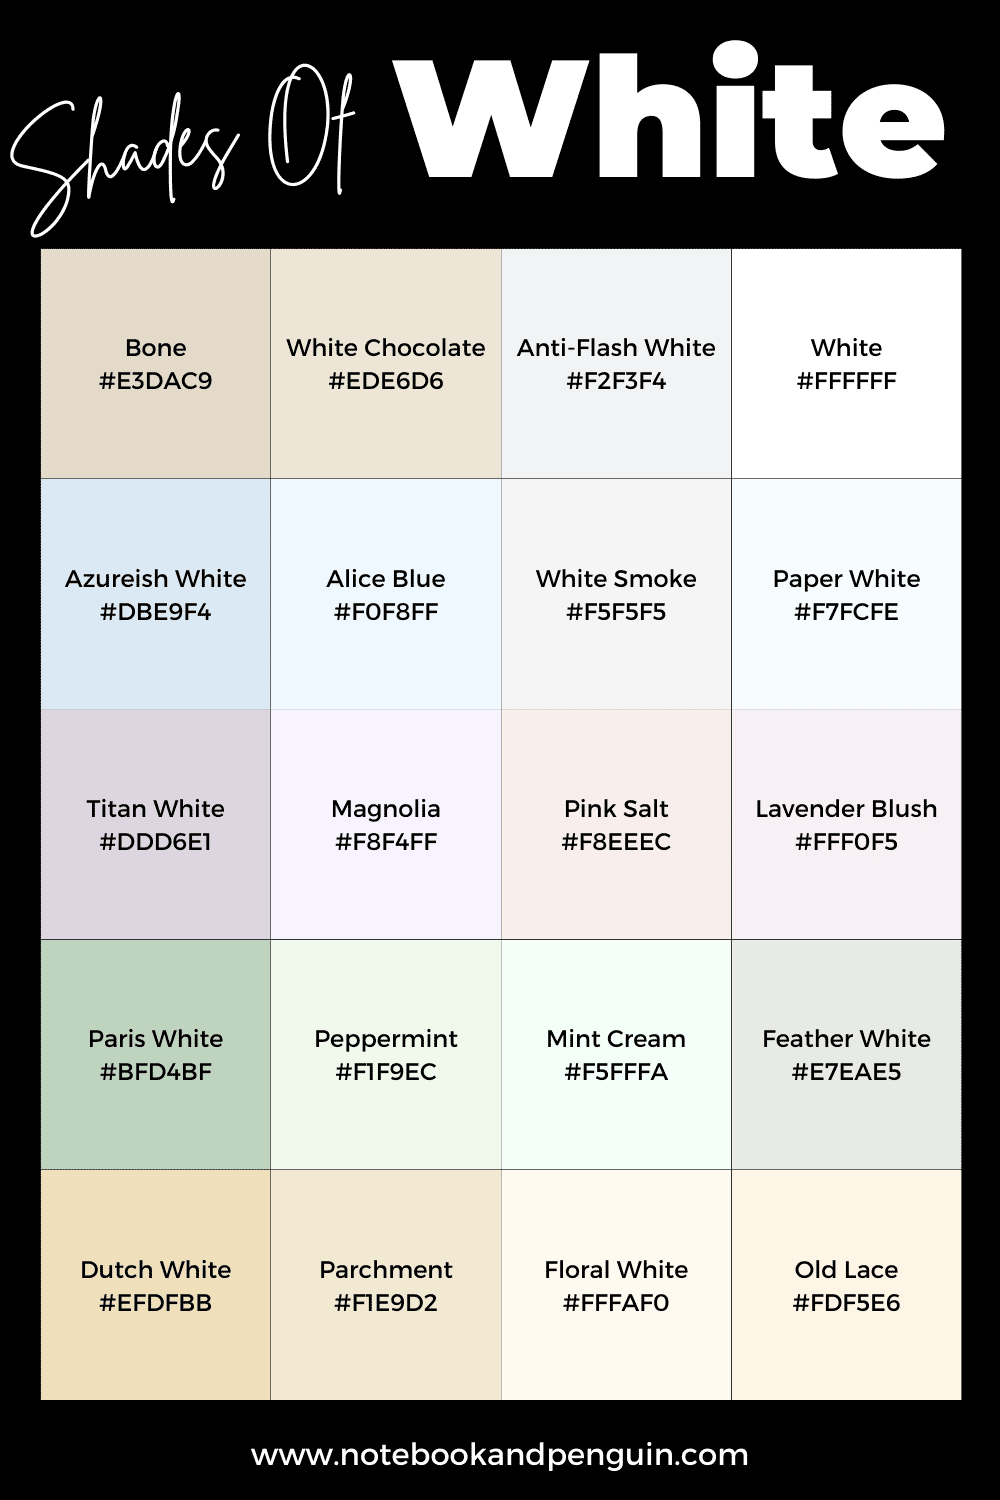 Shades of white infographic with white hex codes and shades of white names.